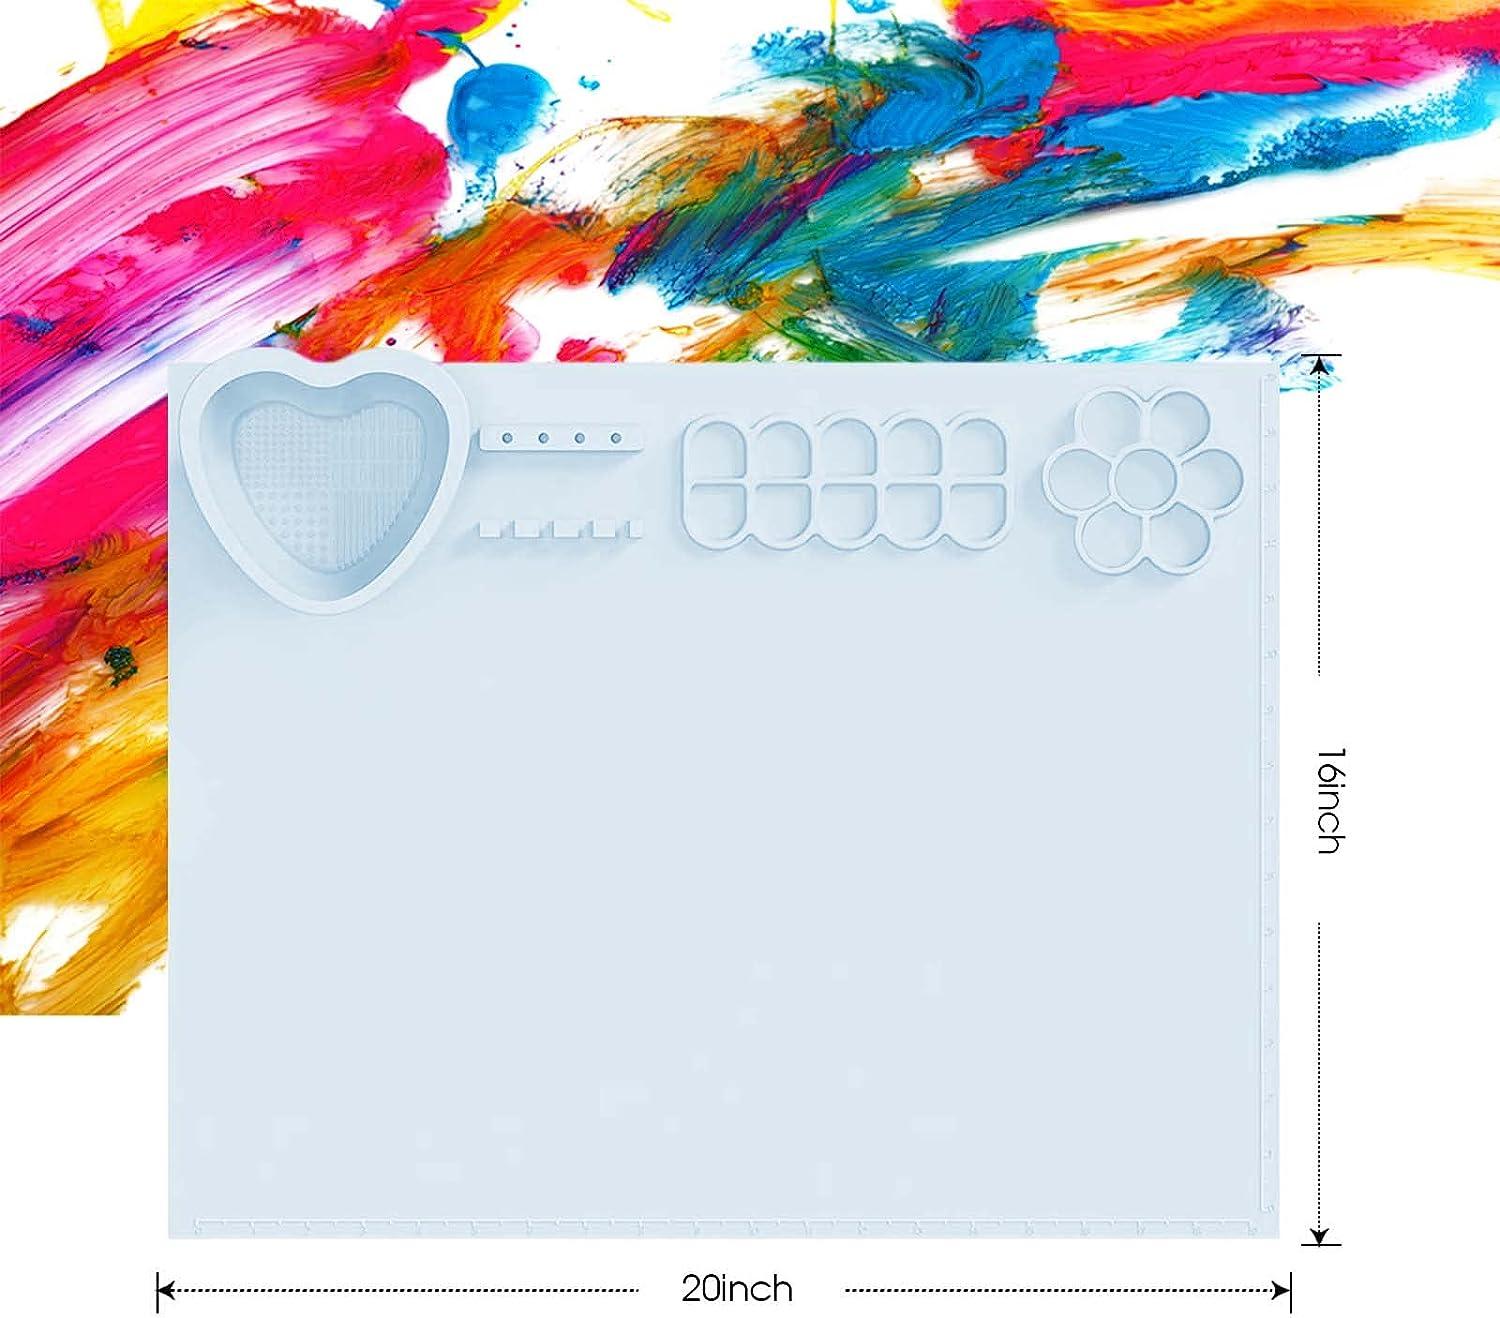 Silicon Art Mat - Silicon Mat With Cup